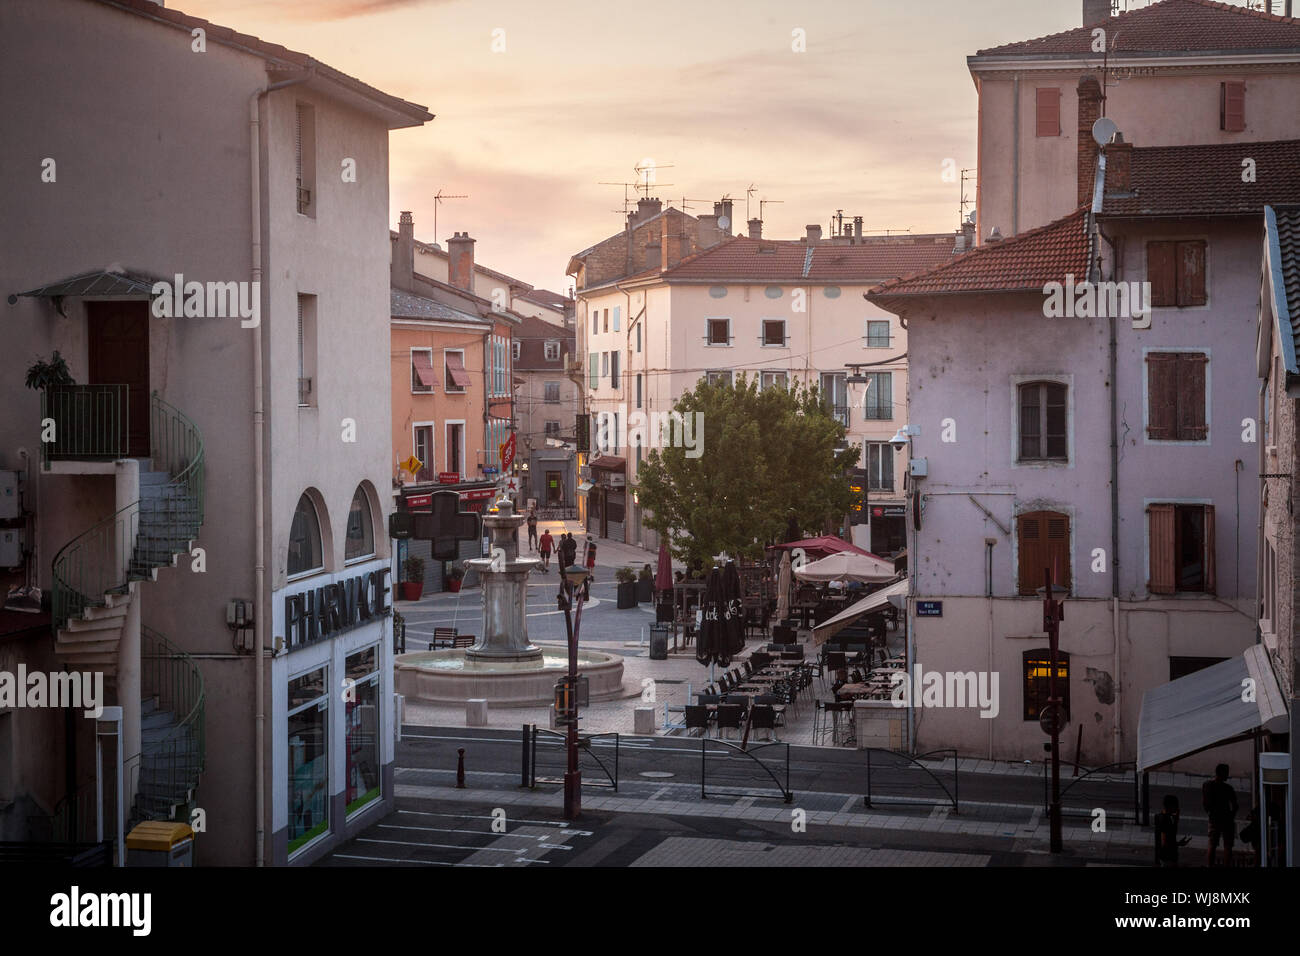 BOURGOIN-JALLIEU, FRANCE - JULY 16, 2019: Place du 23 Aout 1944 Square, a pedestrian square with cafes and bars, in the center of Bourgoin, a typical Stock Photo